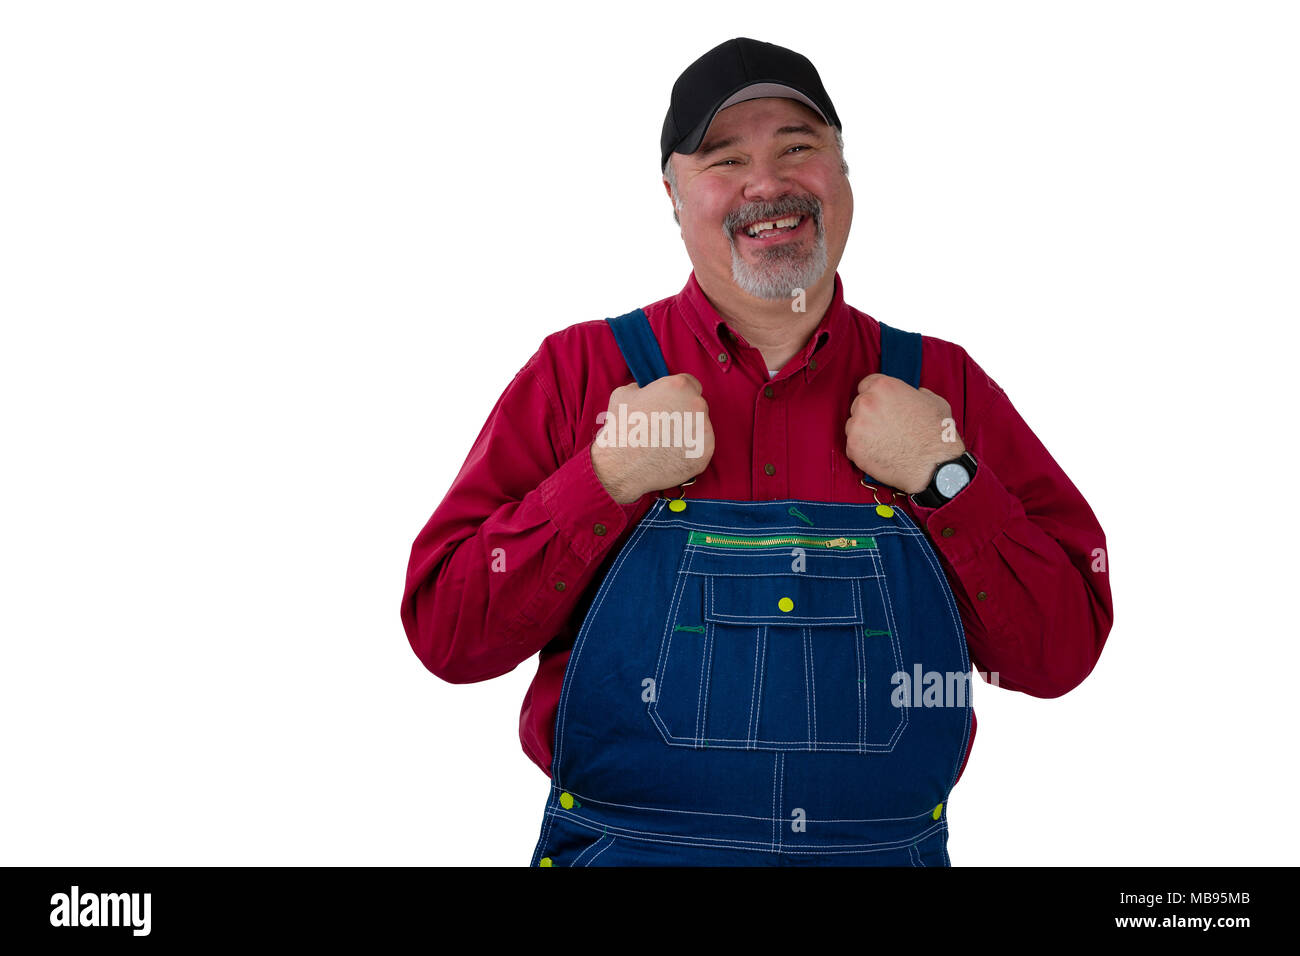 Middle-aged worker in dungarees with a proud smile holding the straps of his overalls as he grins at the camera isolated on white Stock Photo